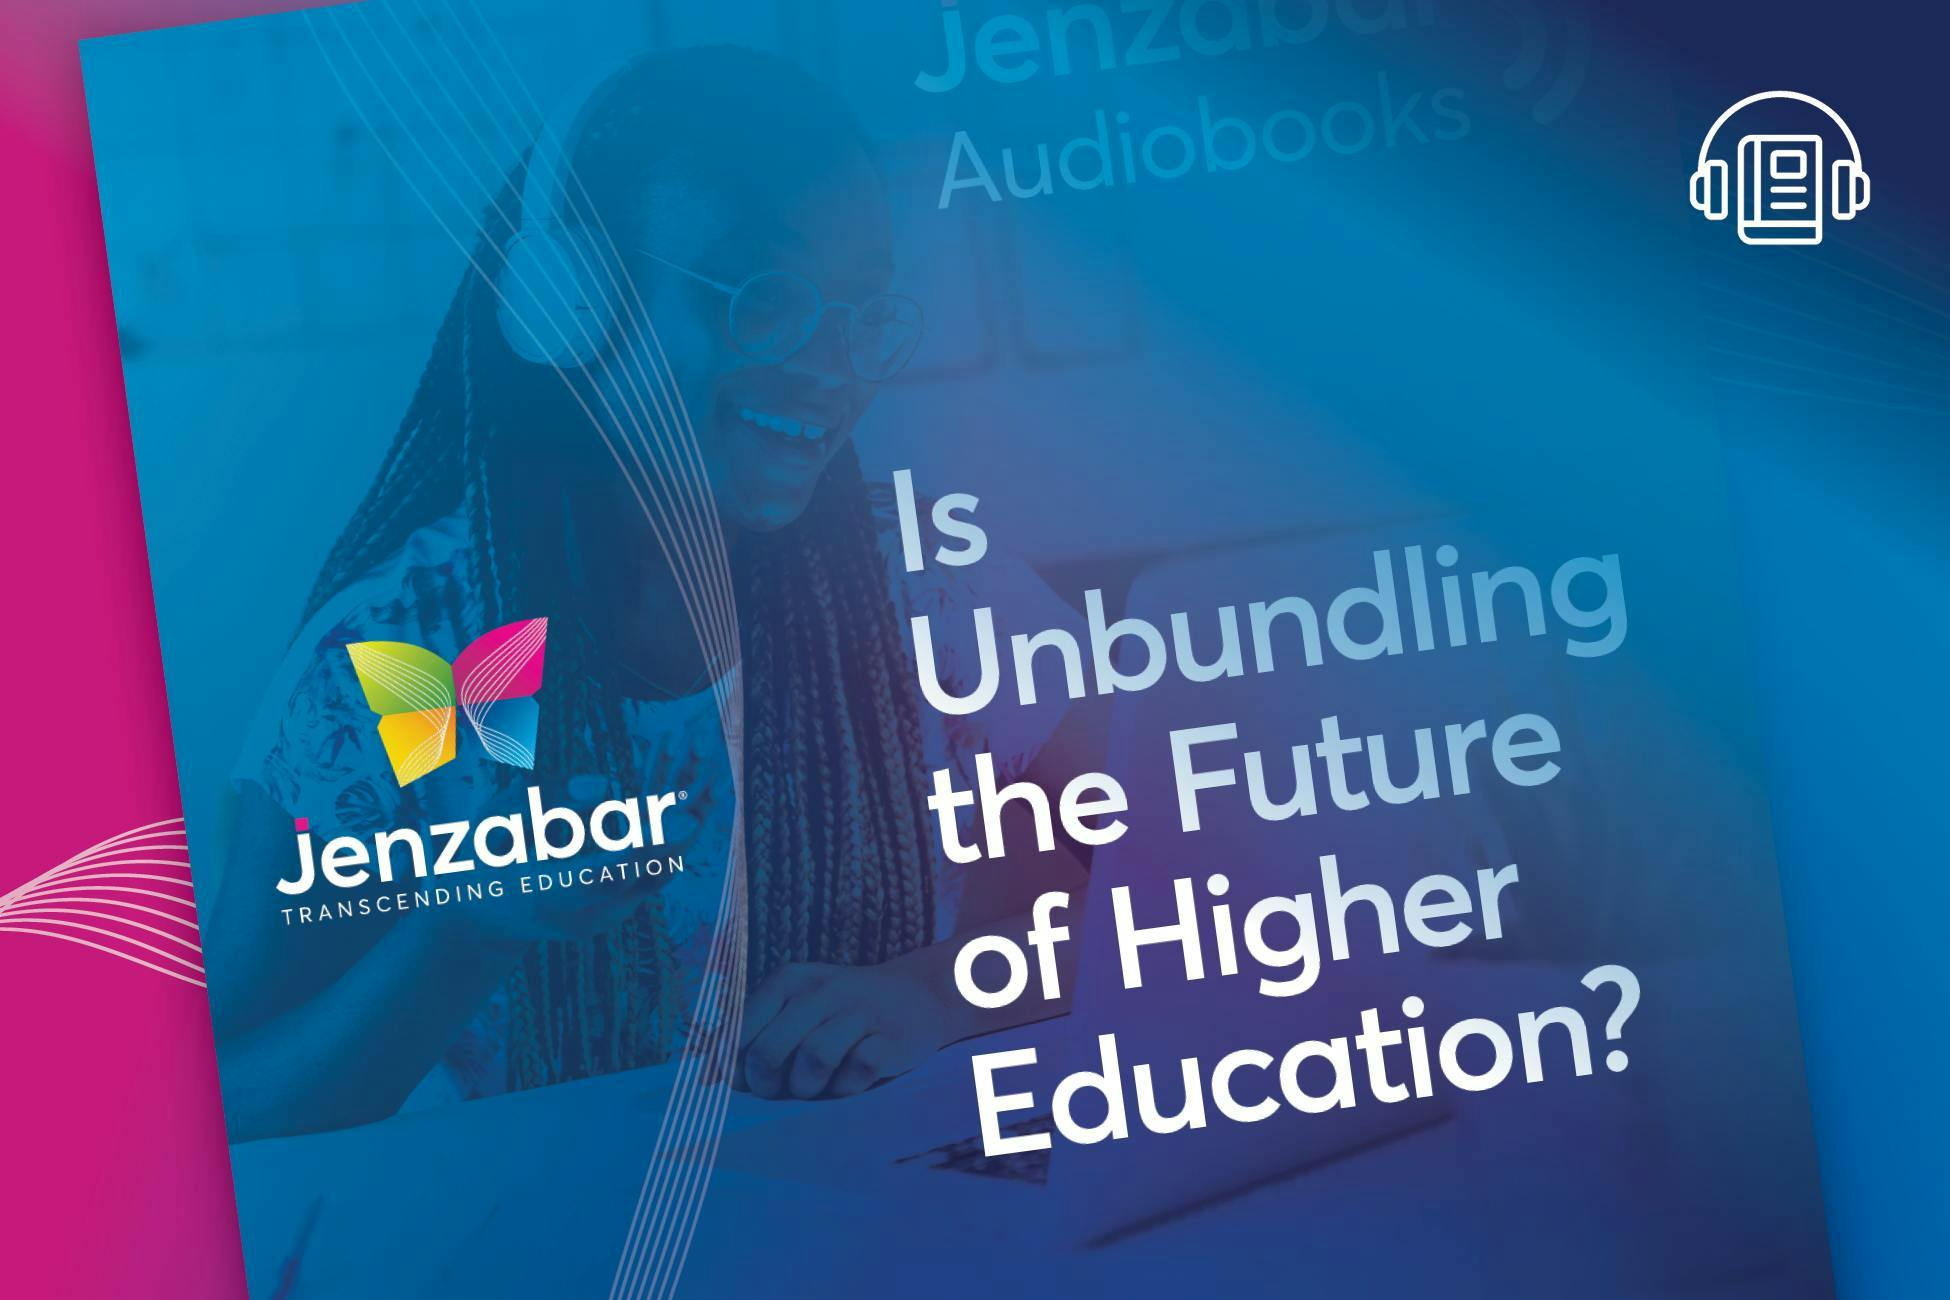 Audiobook: Is Unbundling the Future of Higher Education?